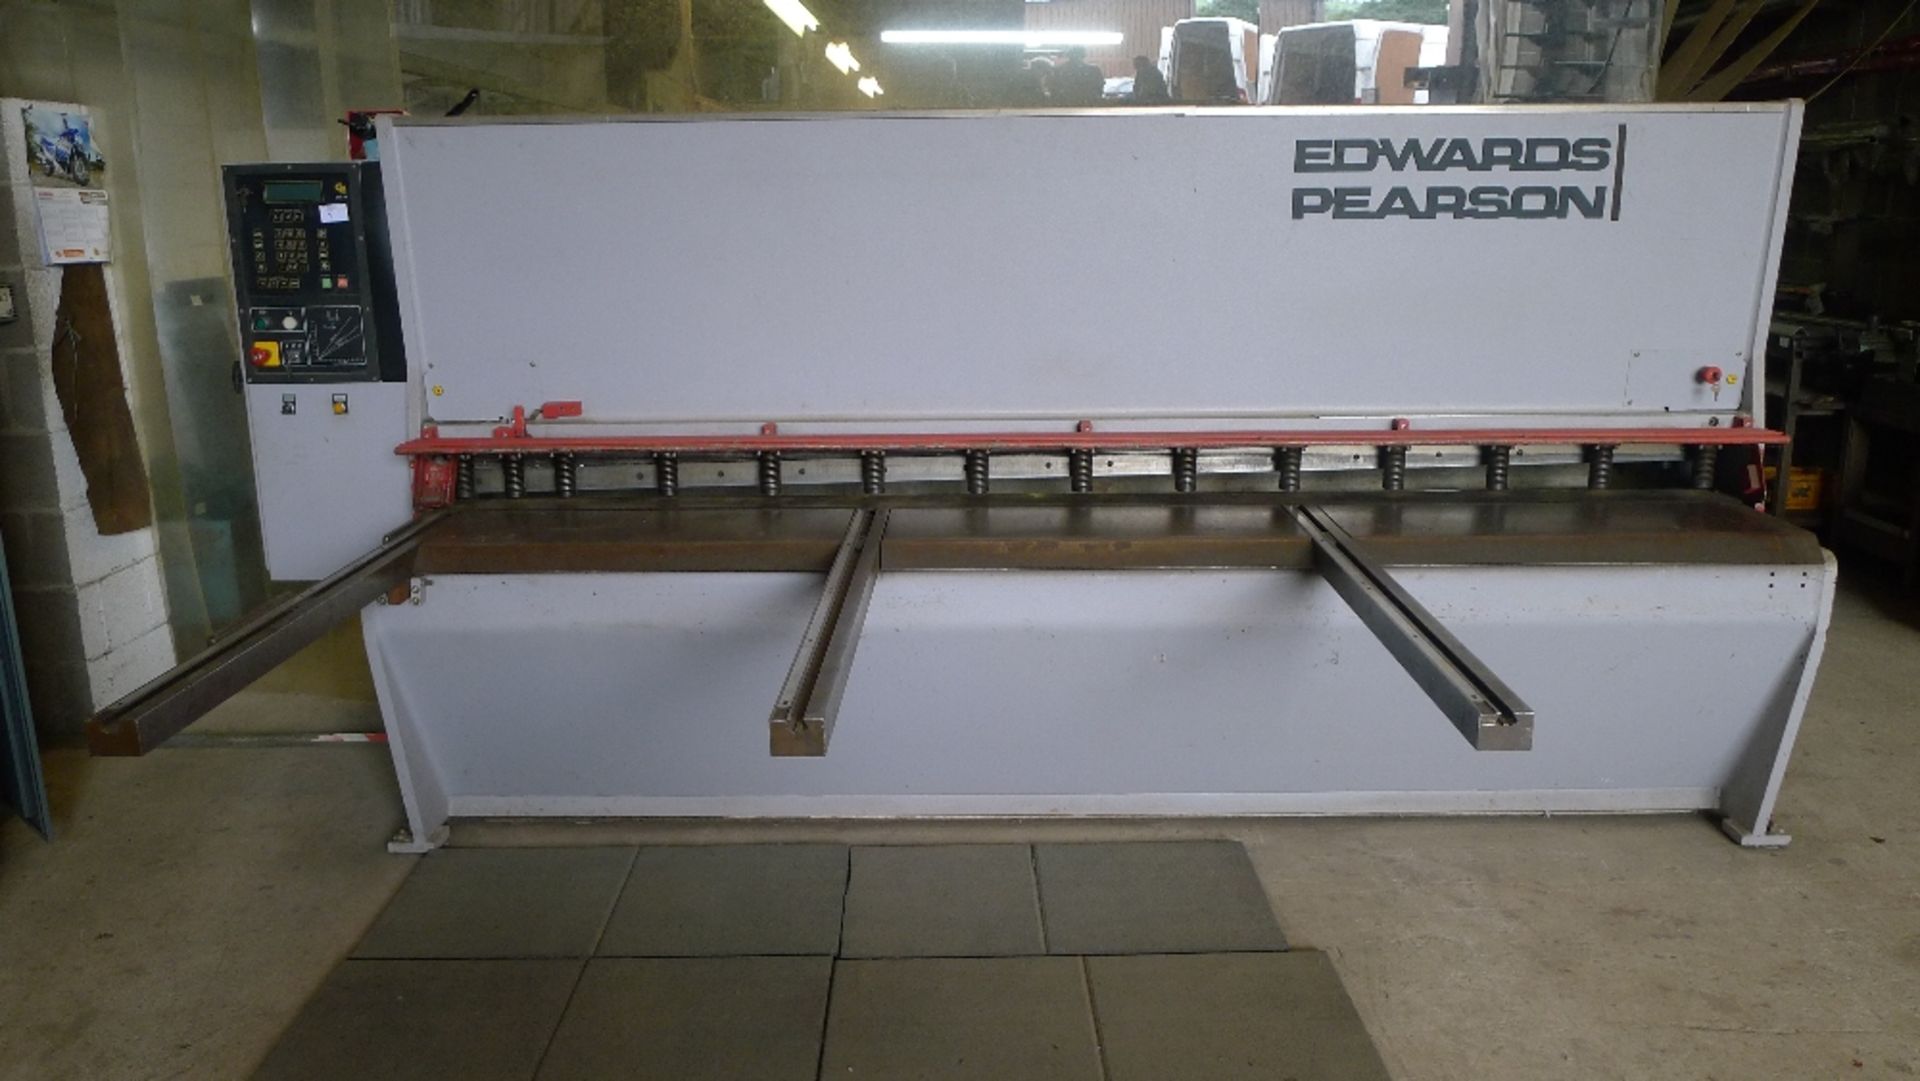 1 Edwards Pearson metal cutting guillotine model VR 6.5 / 3000, machine number 00V164, YOM 2000, 3ph